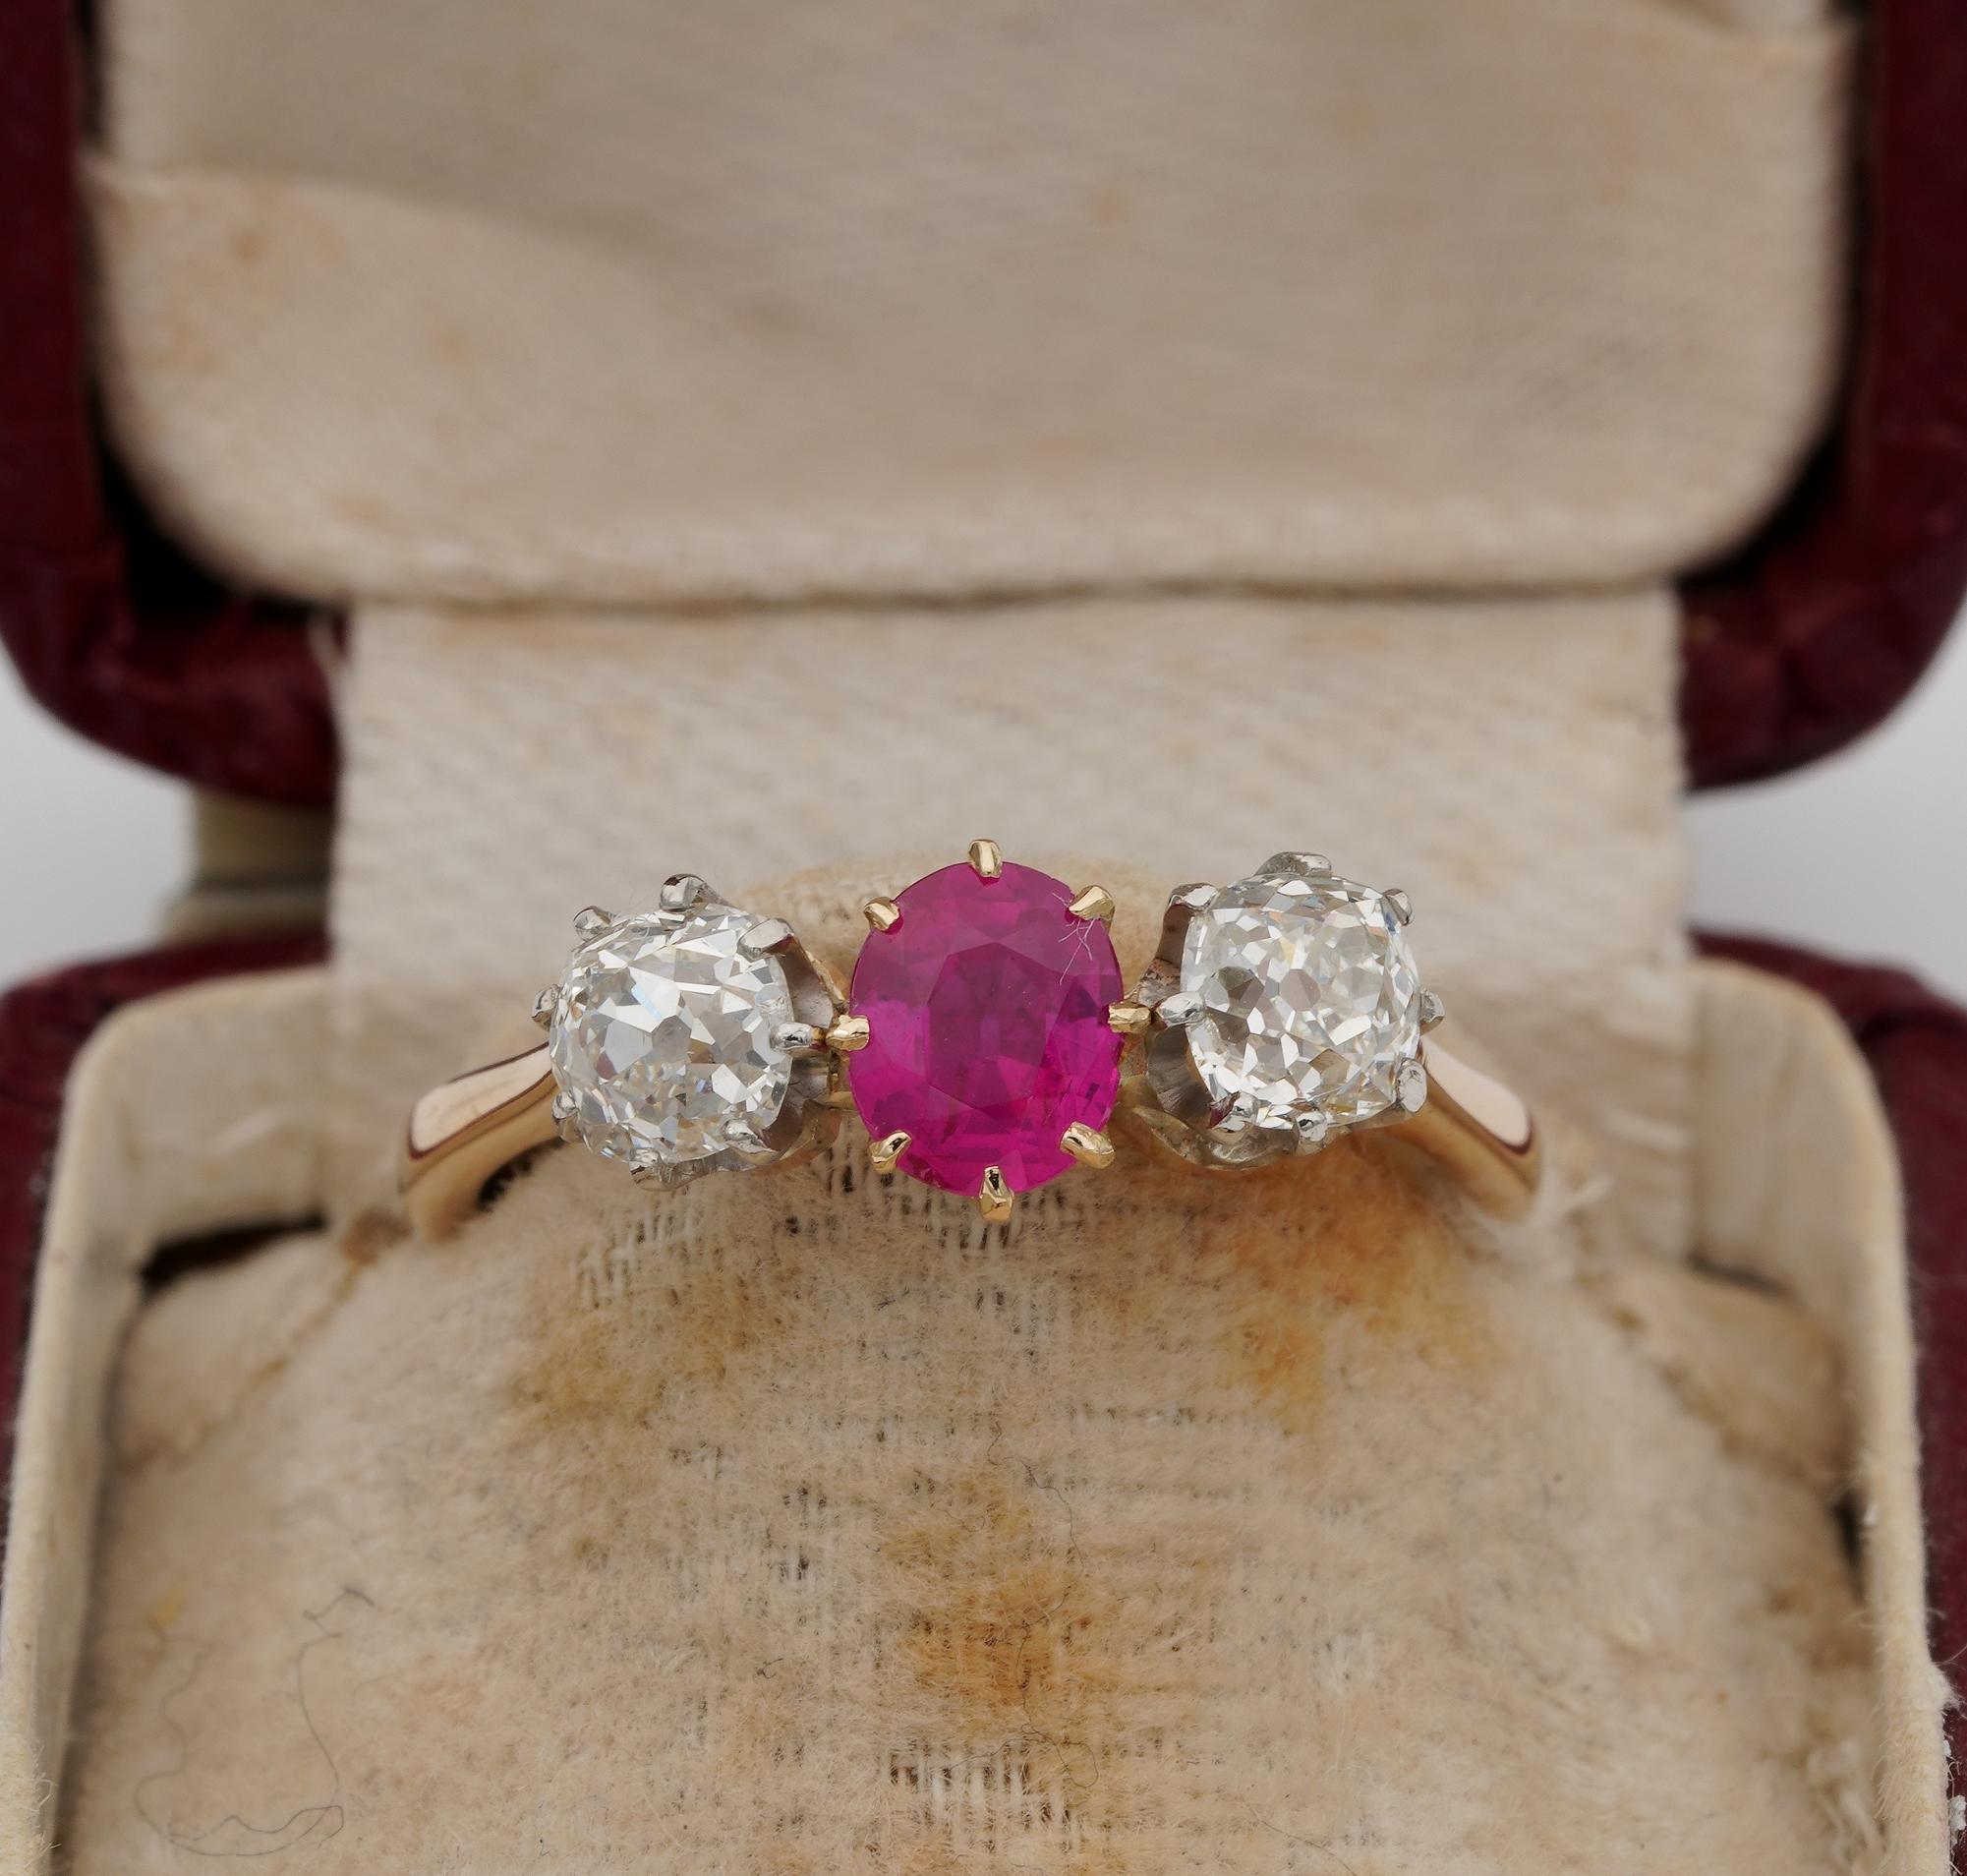 The Rarity Corner

This lovely Victorian ring is 1880 ca
Traditional trilogy version set with finest earth mined gemstones to be a sought after stand out within all others
the gorgeous mounting is finely hand made of solid 18 KT gold made to exalt